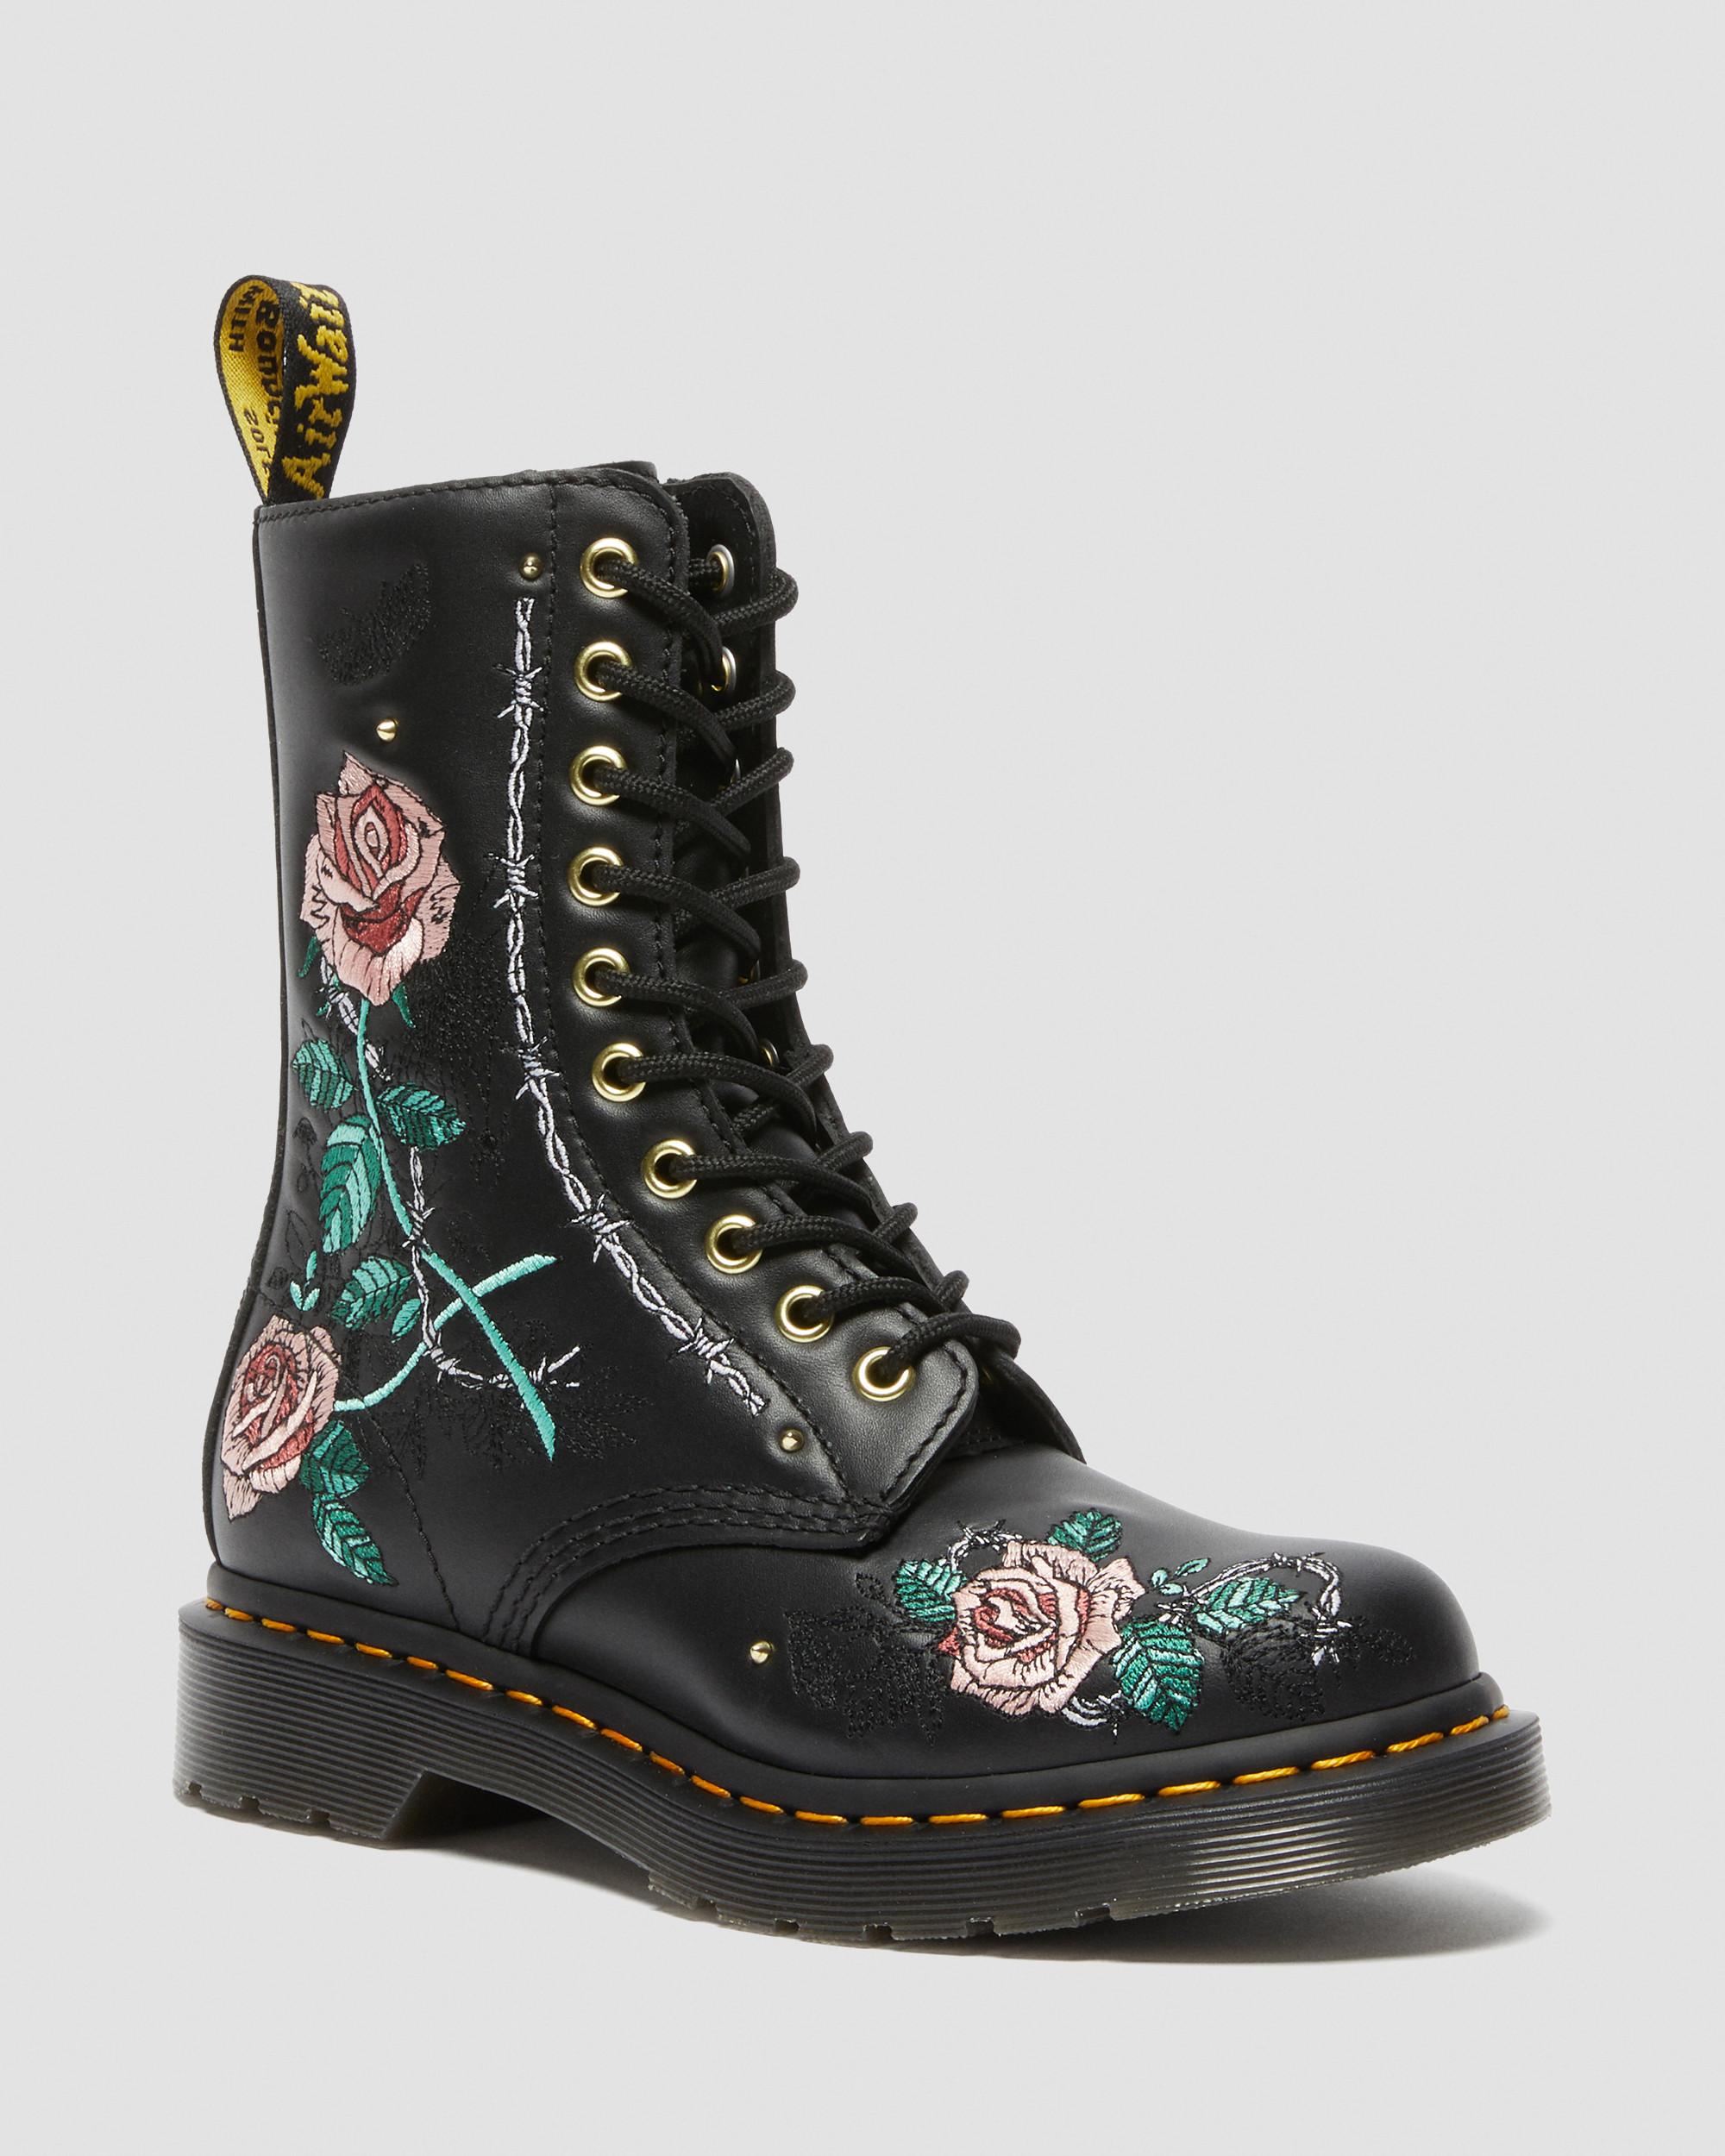 1490 Vonda Floral Leather Mid Calf Boots in Black | Dr. Martens